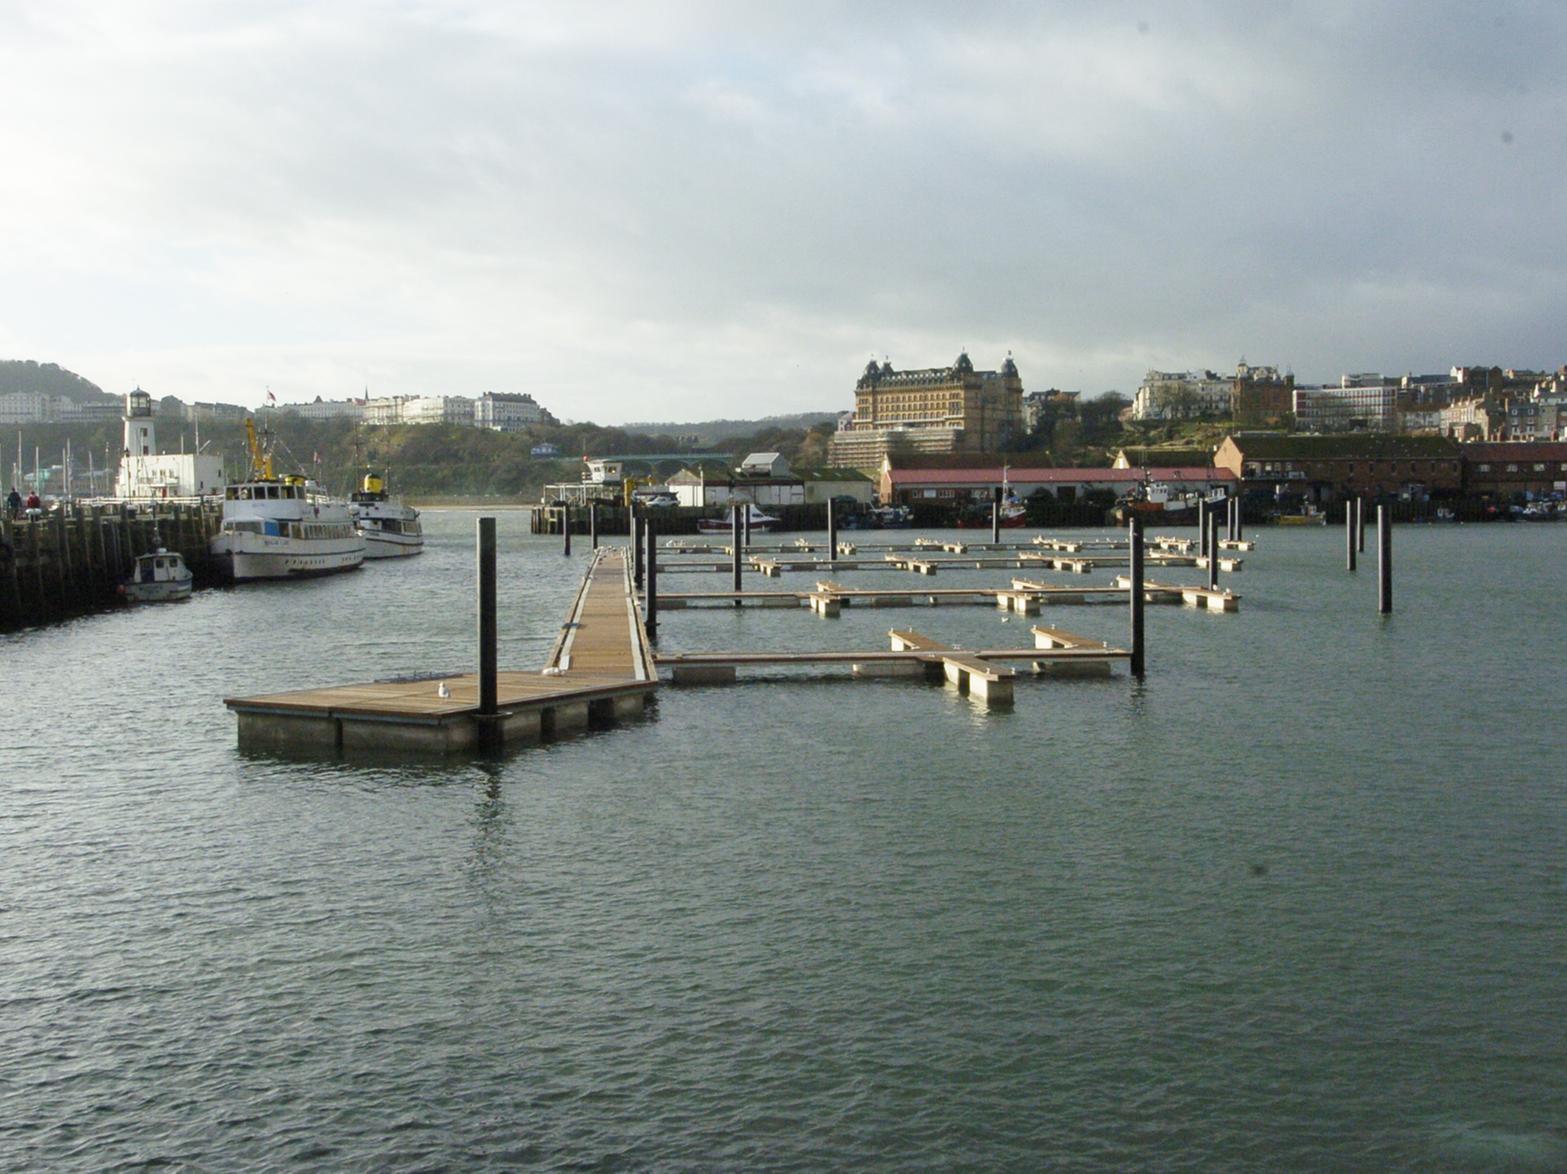 At the turn of the century the harbour looked very different. The installation of 60 new pontoons was completed in December 2006, the final stage of the harbour and marina improvement project.